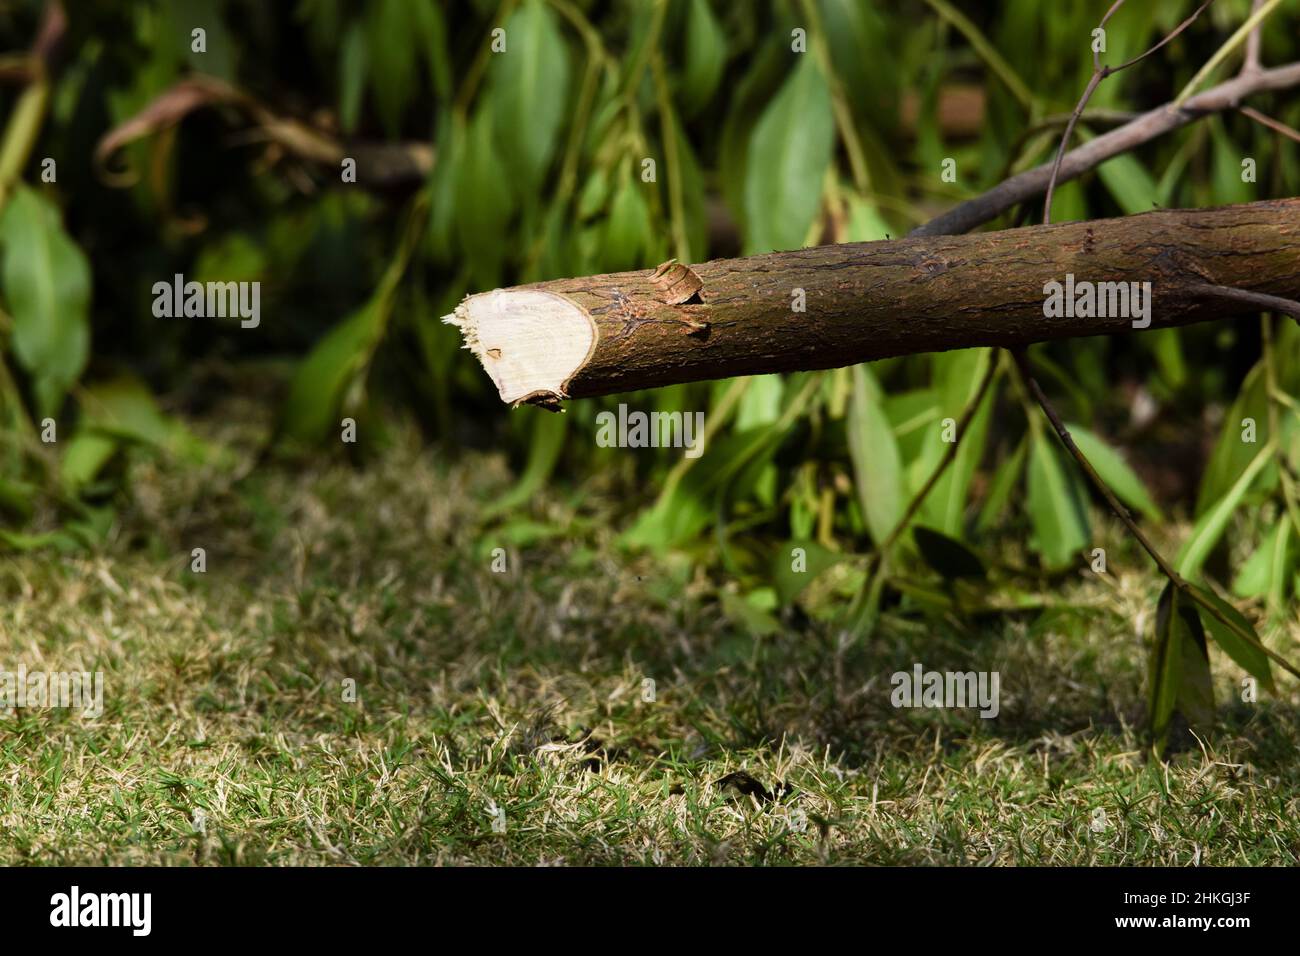 Tree thing stem cut in open nature environment. Freshly cut green leafy tree stem for landscaping garden wall compound Stock Photo